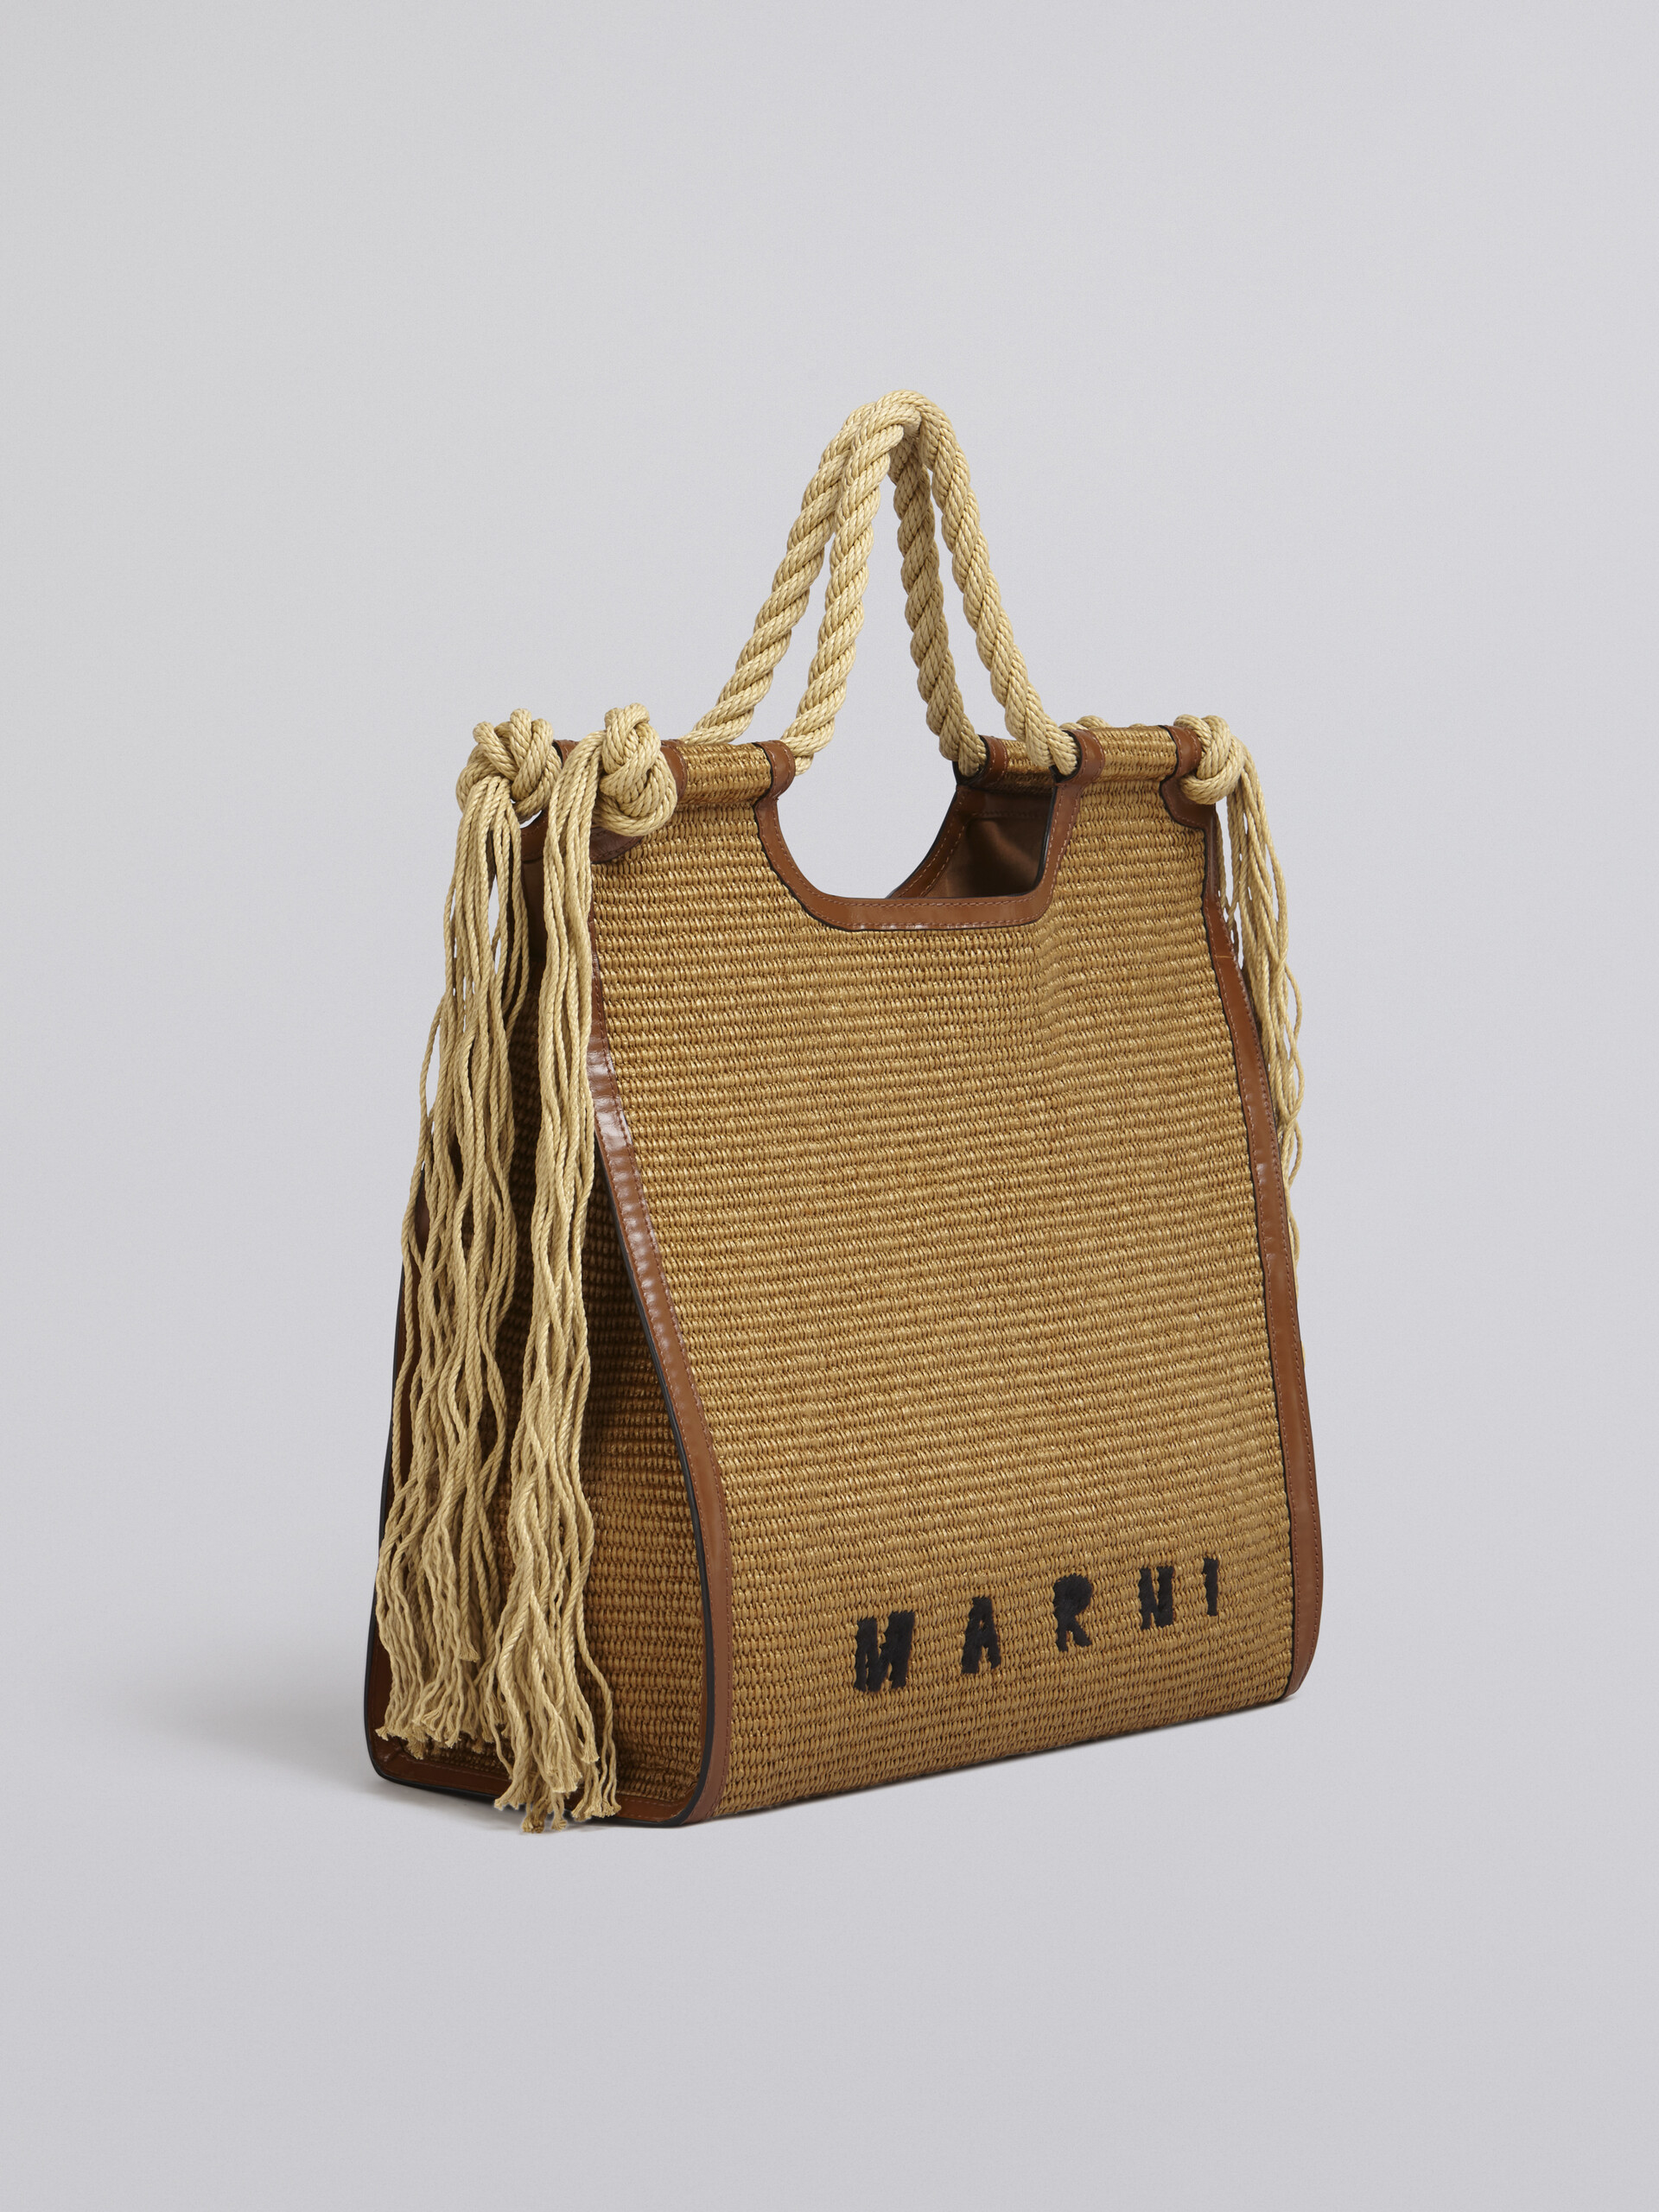 Marcel summer bag in brown leather and raffia with rope handles | Marni